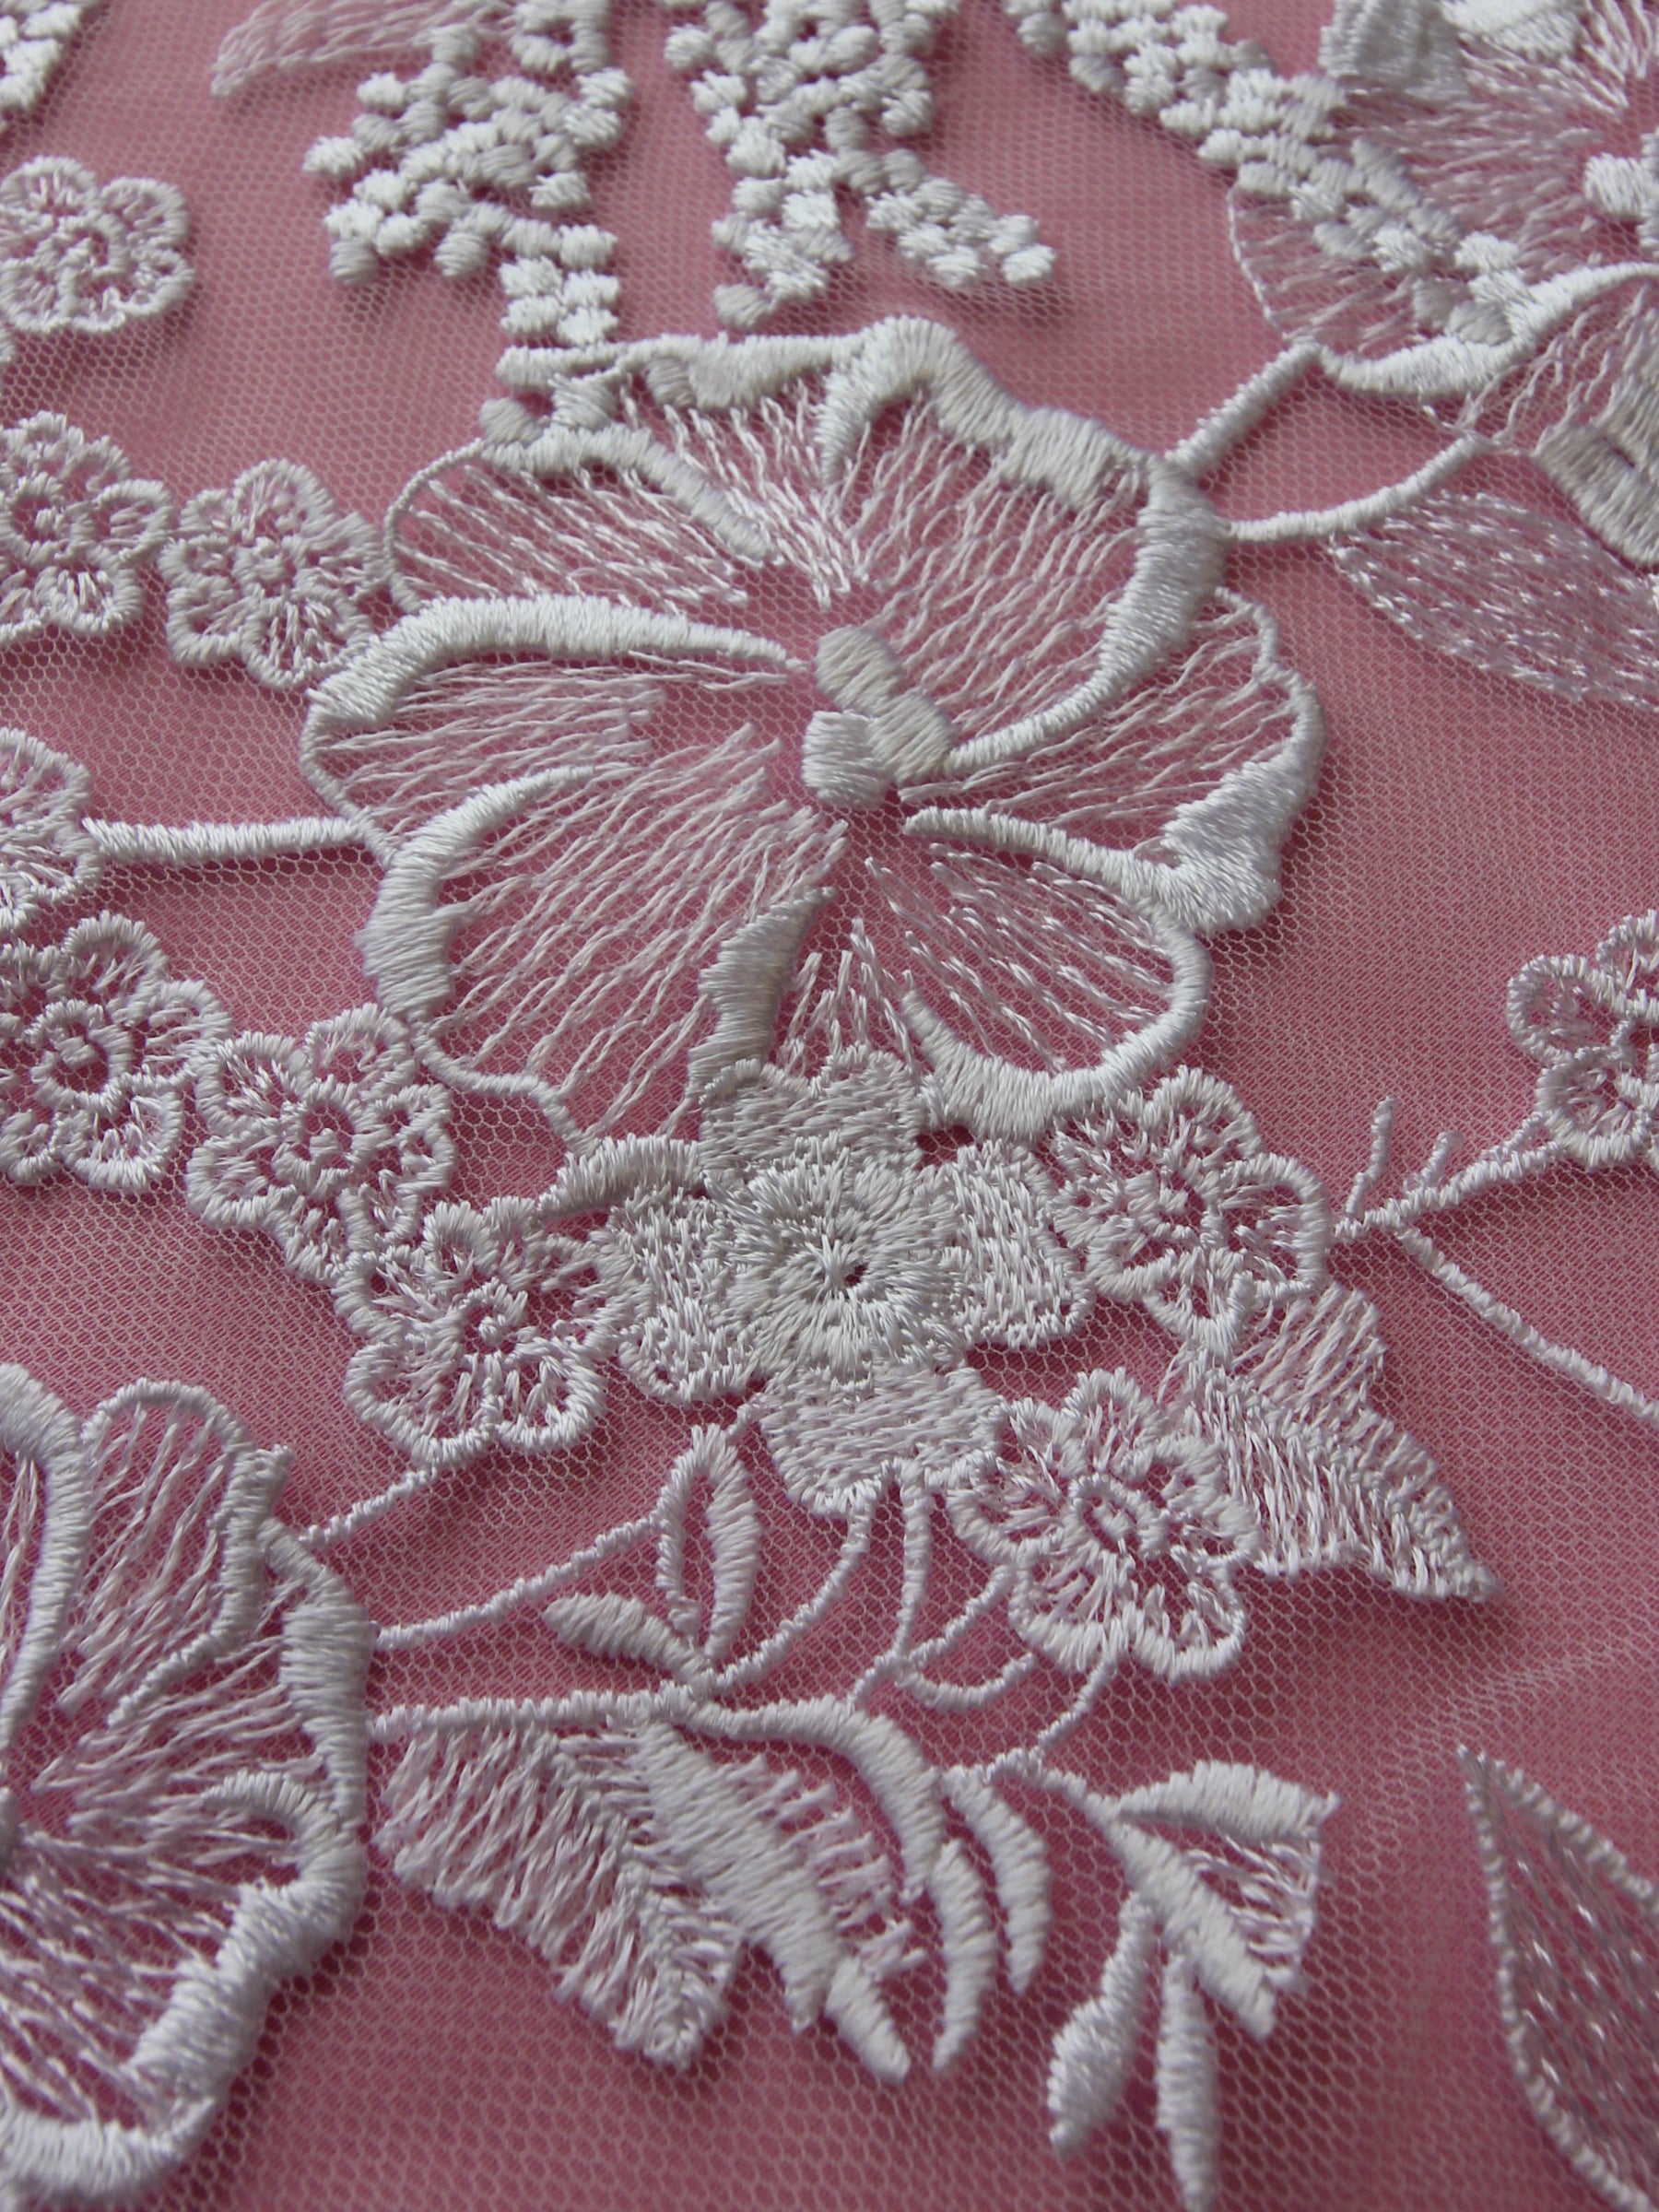 Platinum Embroidery Lace - Garbo